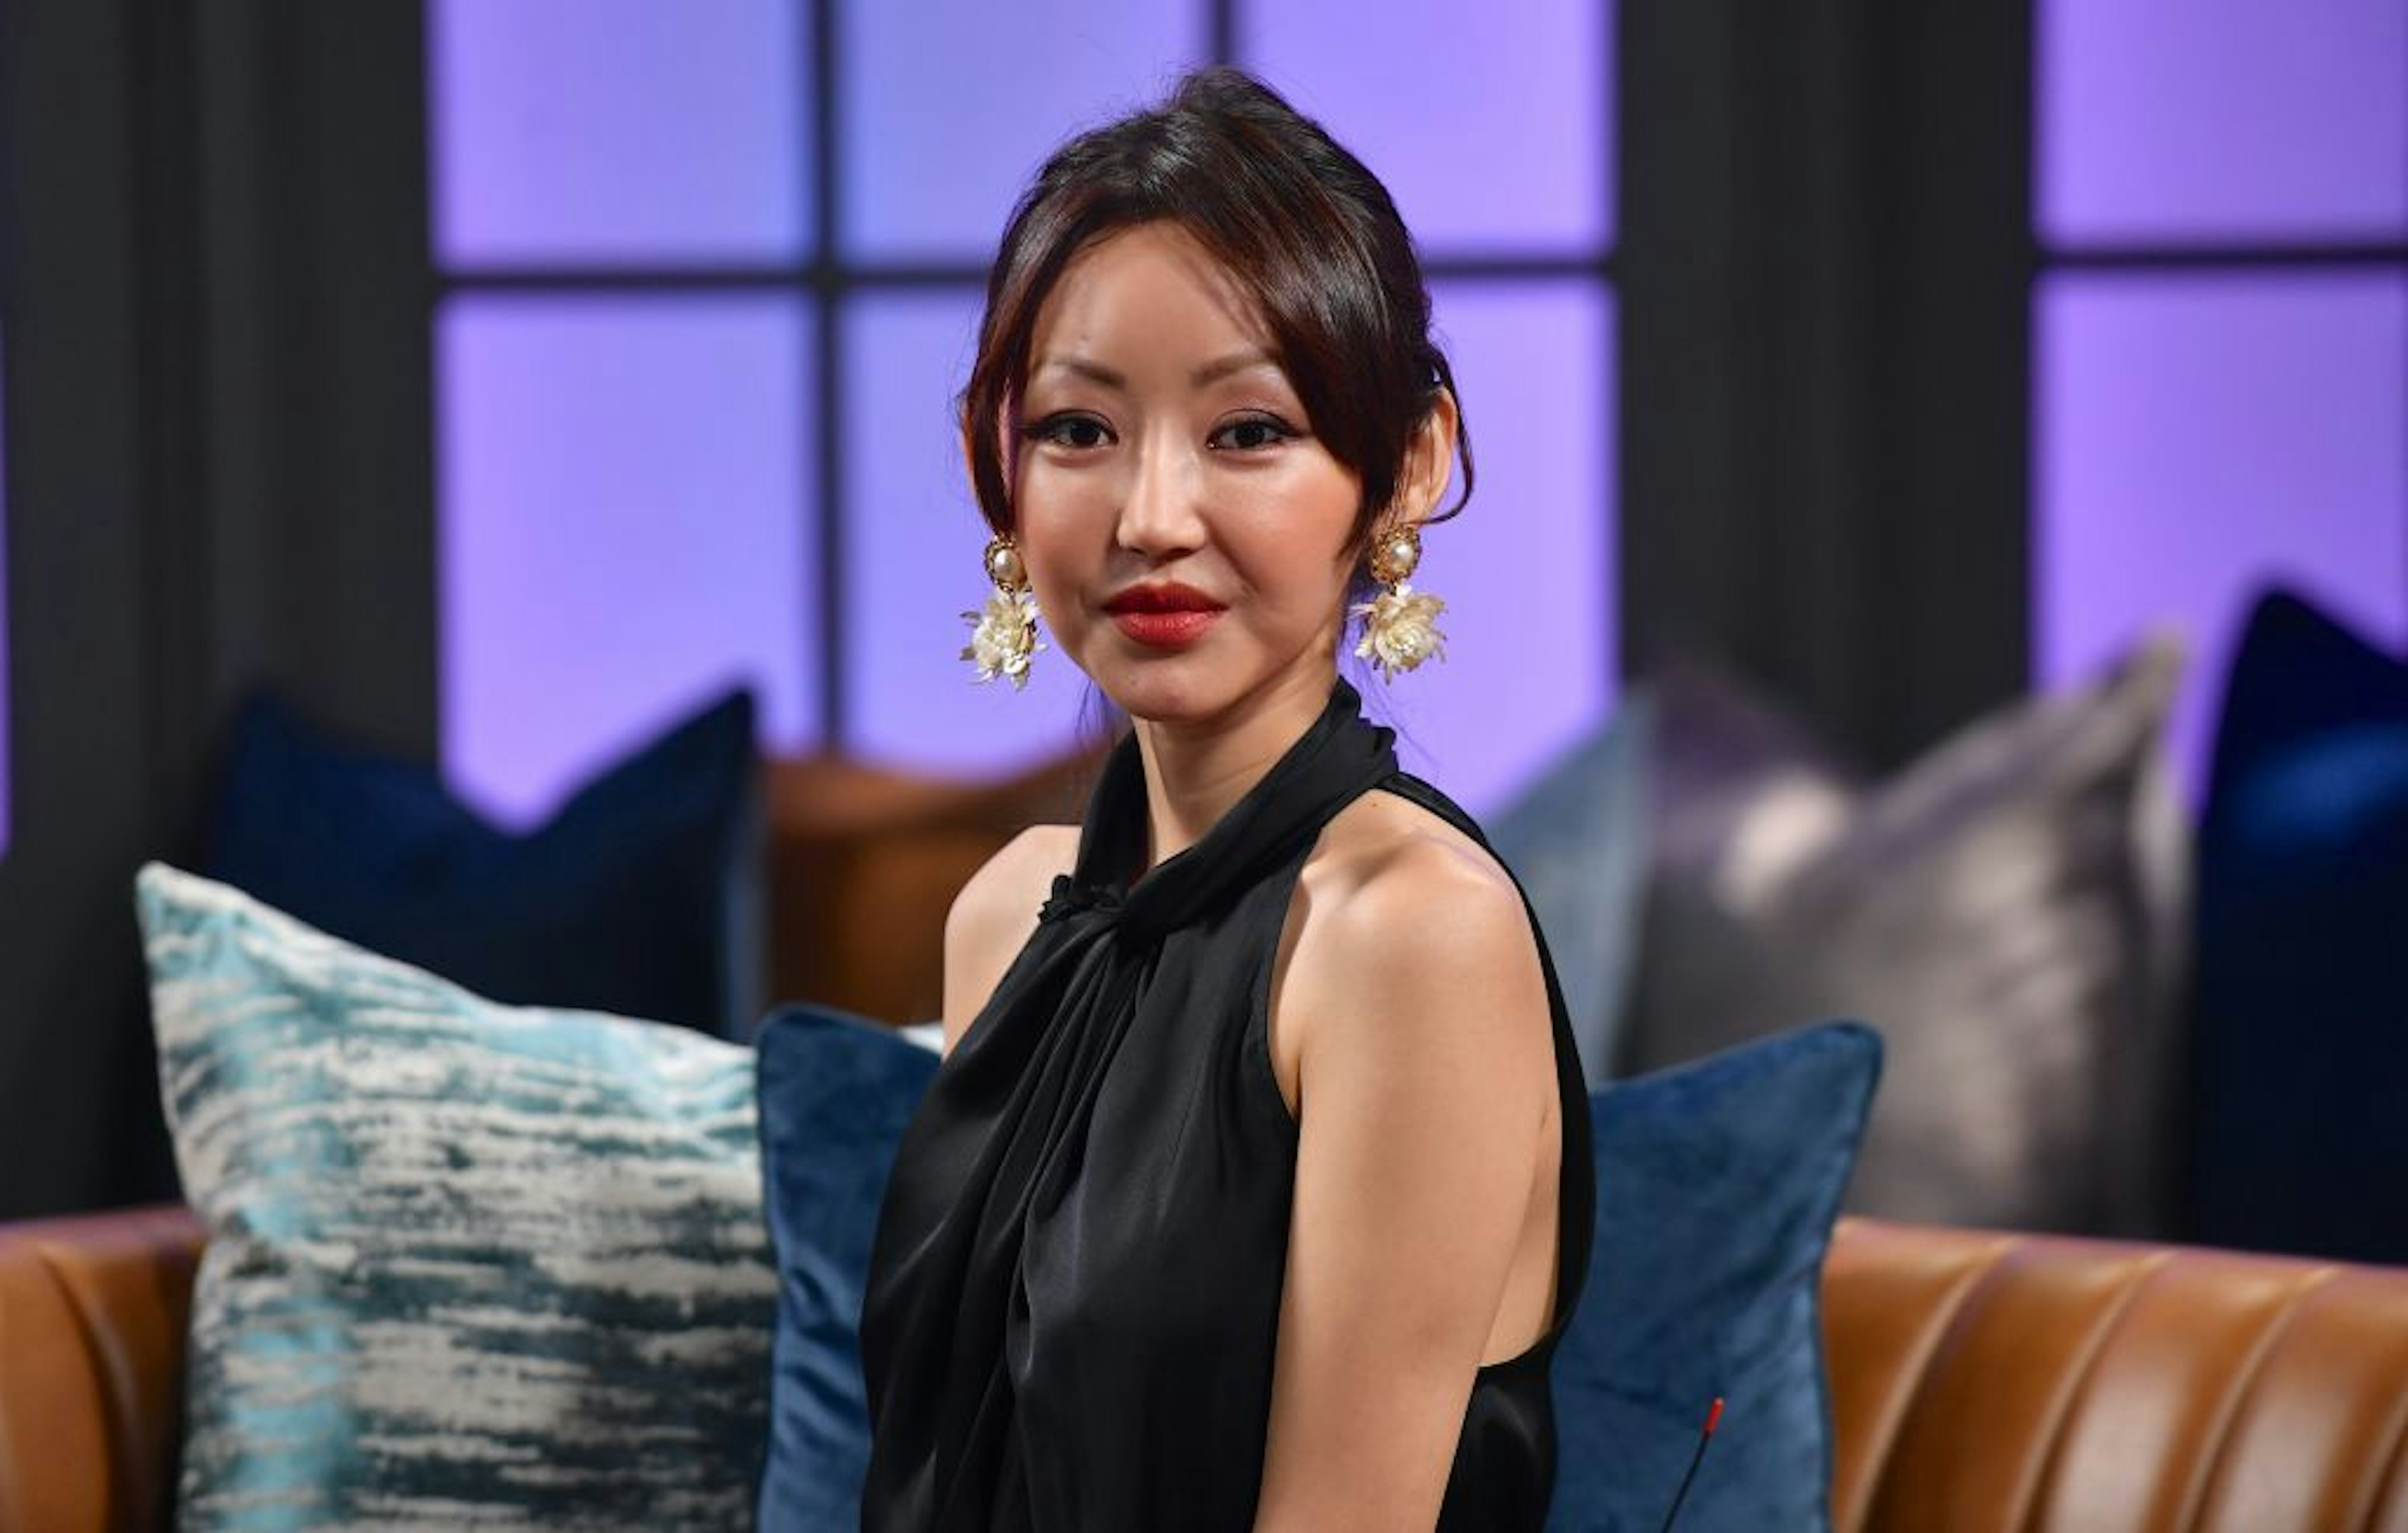 NASHVILLE, TENNESSEE - NOVEMBER 08: Yeonmi Park is seen on set of "Candace" on November 08, 2021 in Nashville, Tennessee. The show will air on Tuesday, November 9th. (Photo by Jason Davis/Getty Images)